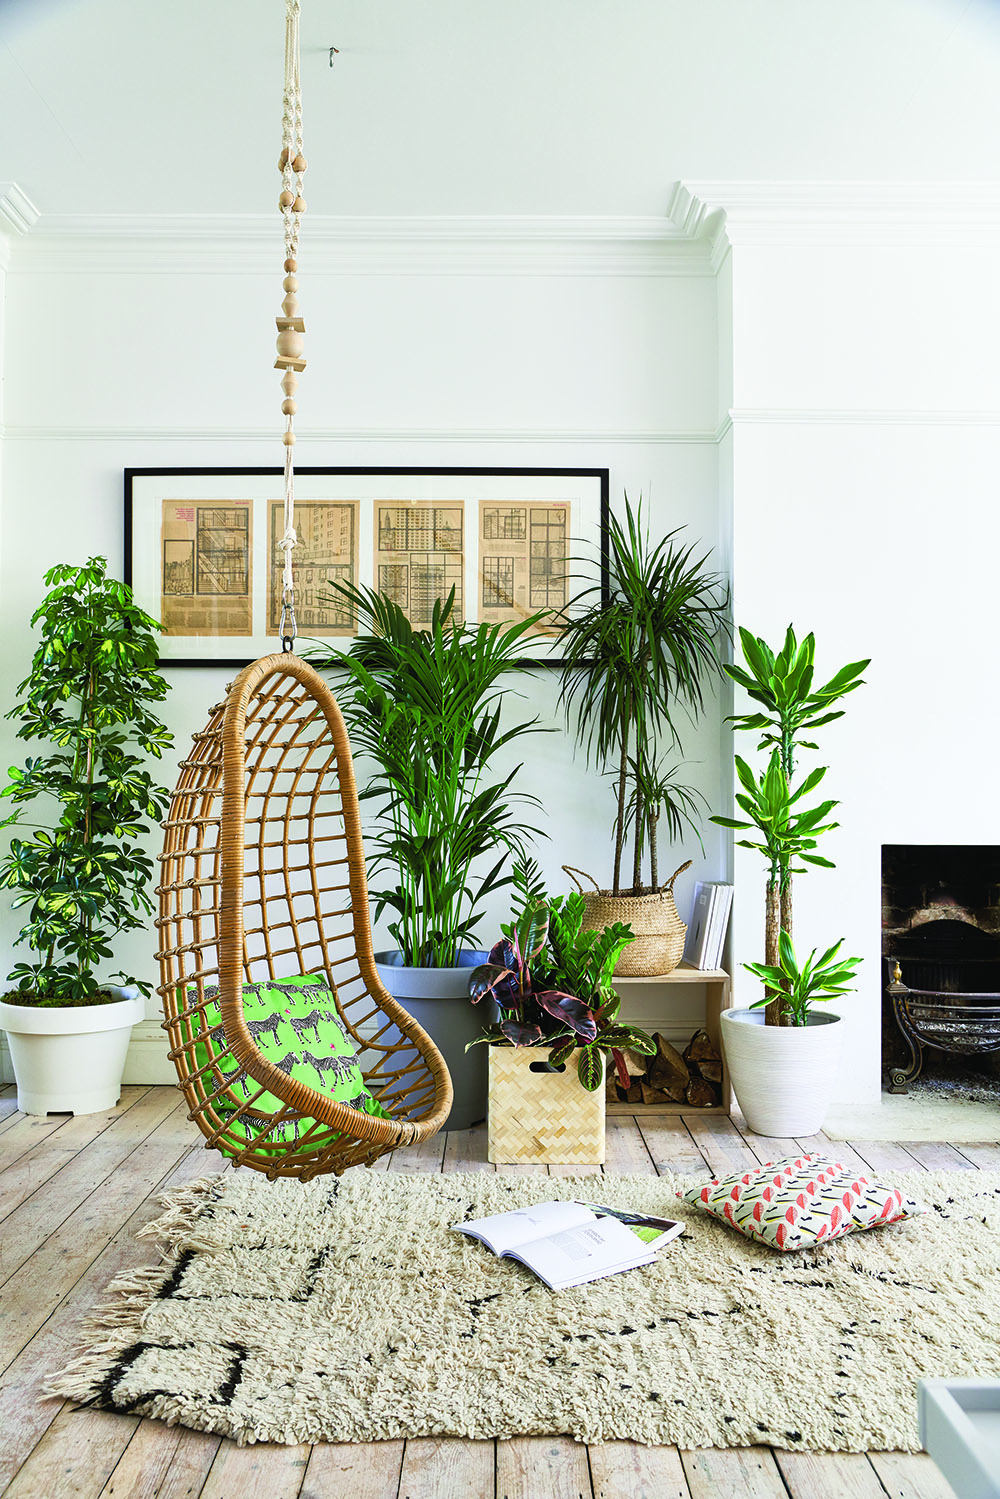 On the blog- review of an amazing new book, ‘At Home with Plants’ by Ian Drummond and Kara O’Reilly, which we think is the definitive guide to house plants. It is a creative masterpiece that will have you dashing out to buy plants, pots and compost in a desperate urge to recreate some of the delicious displays portrayed. 